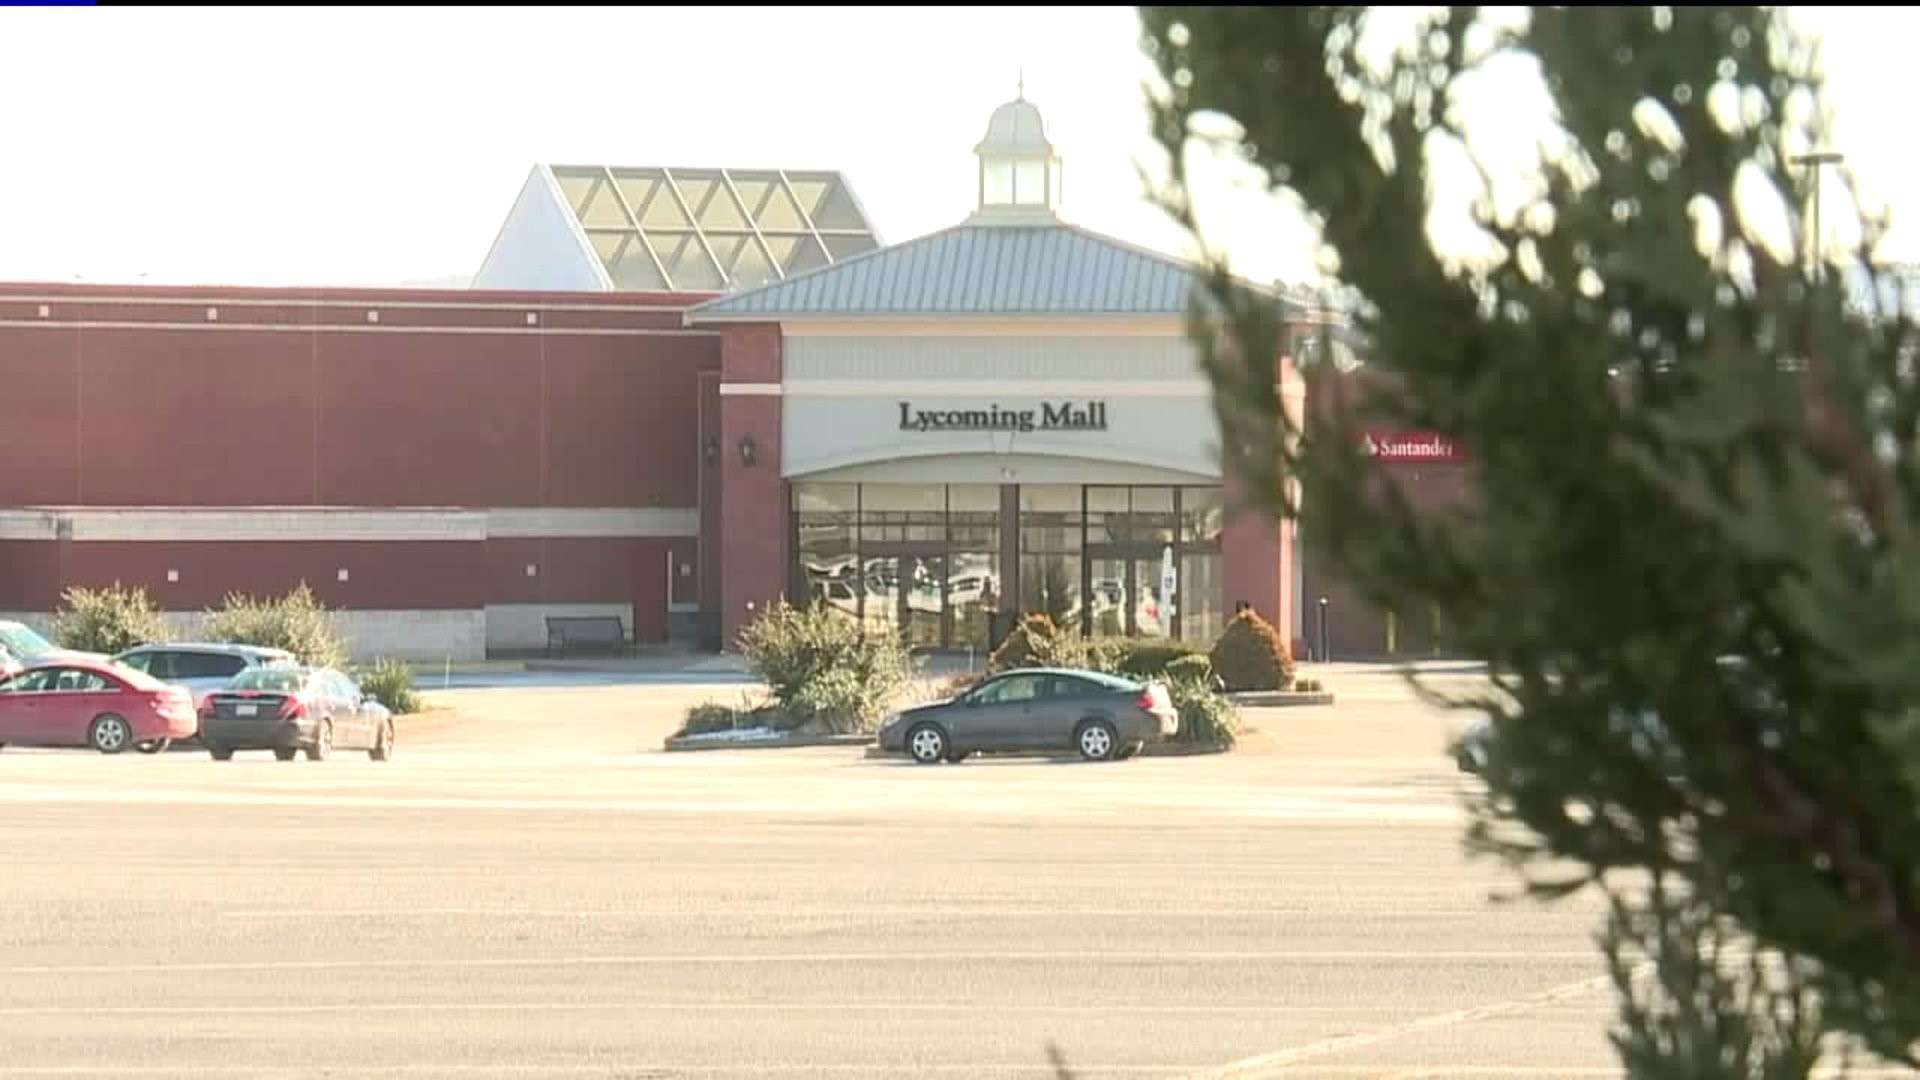 Lycoming Mall Owes Thousands in Unpaid Water, Sewer Bills